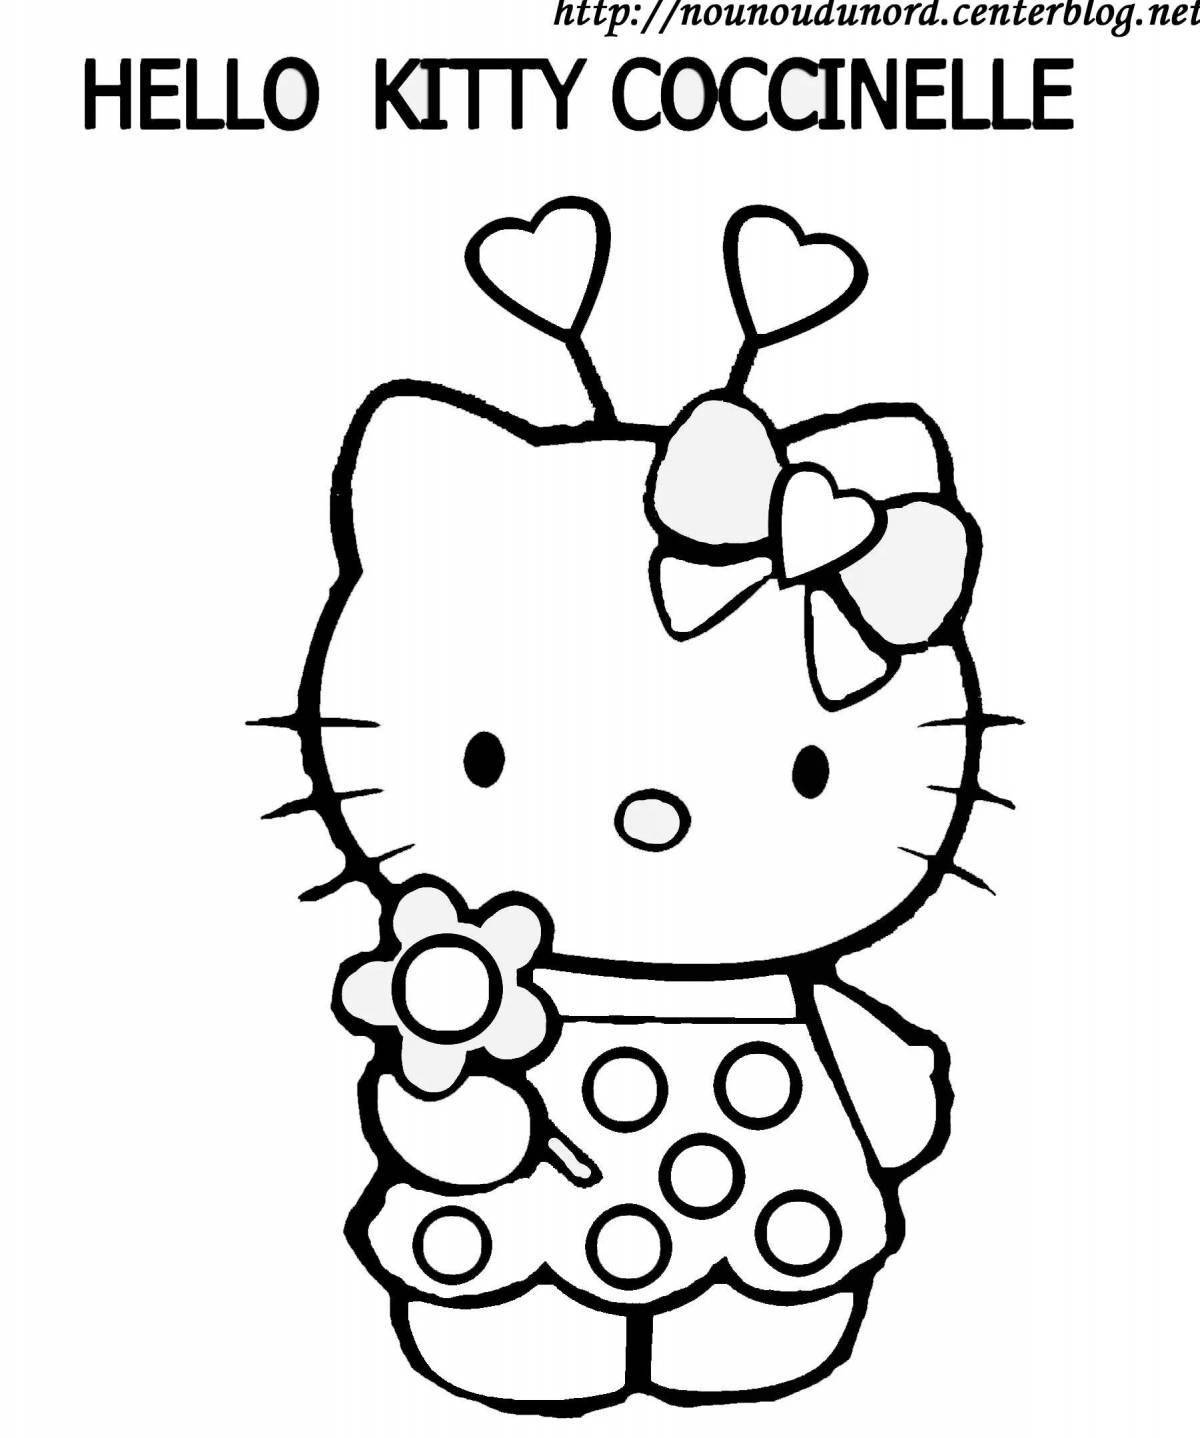 Aster kitty funny coloring book